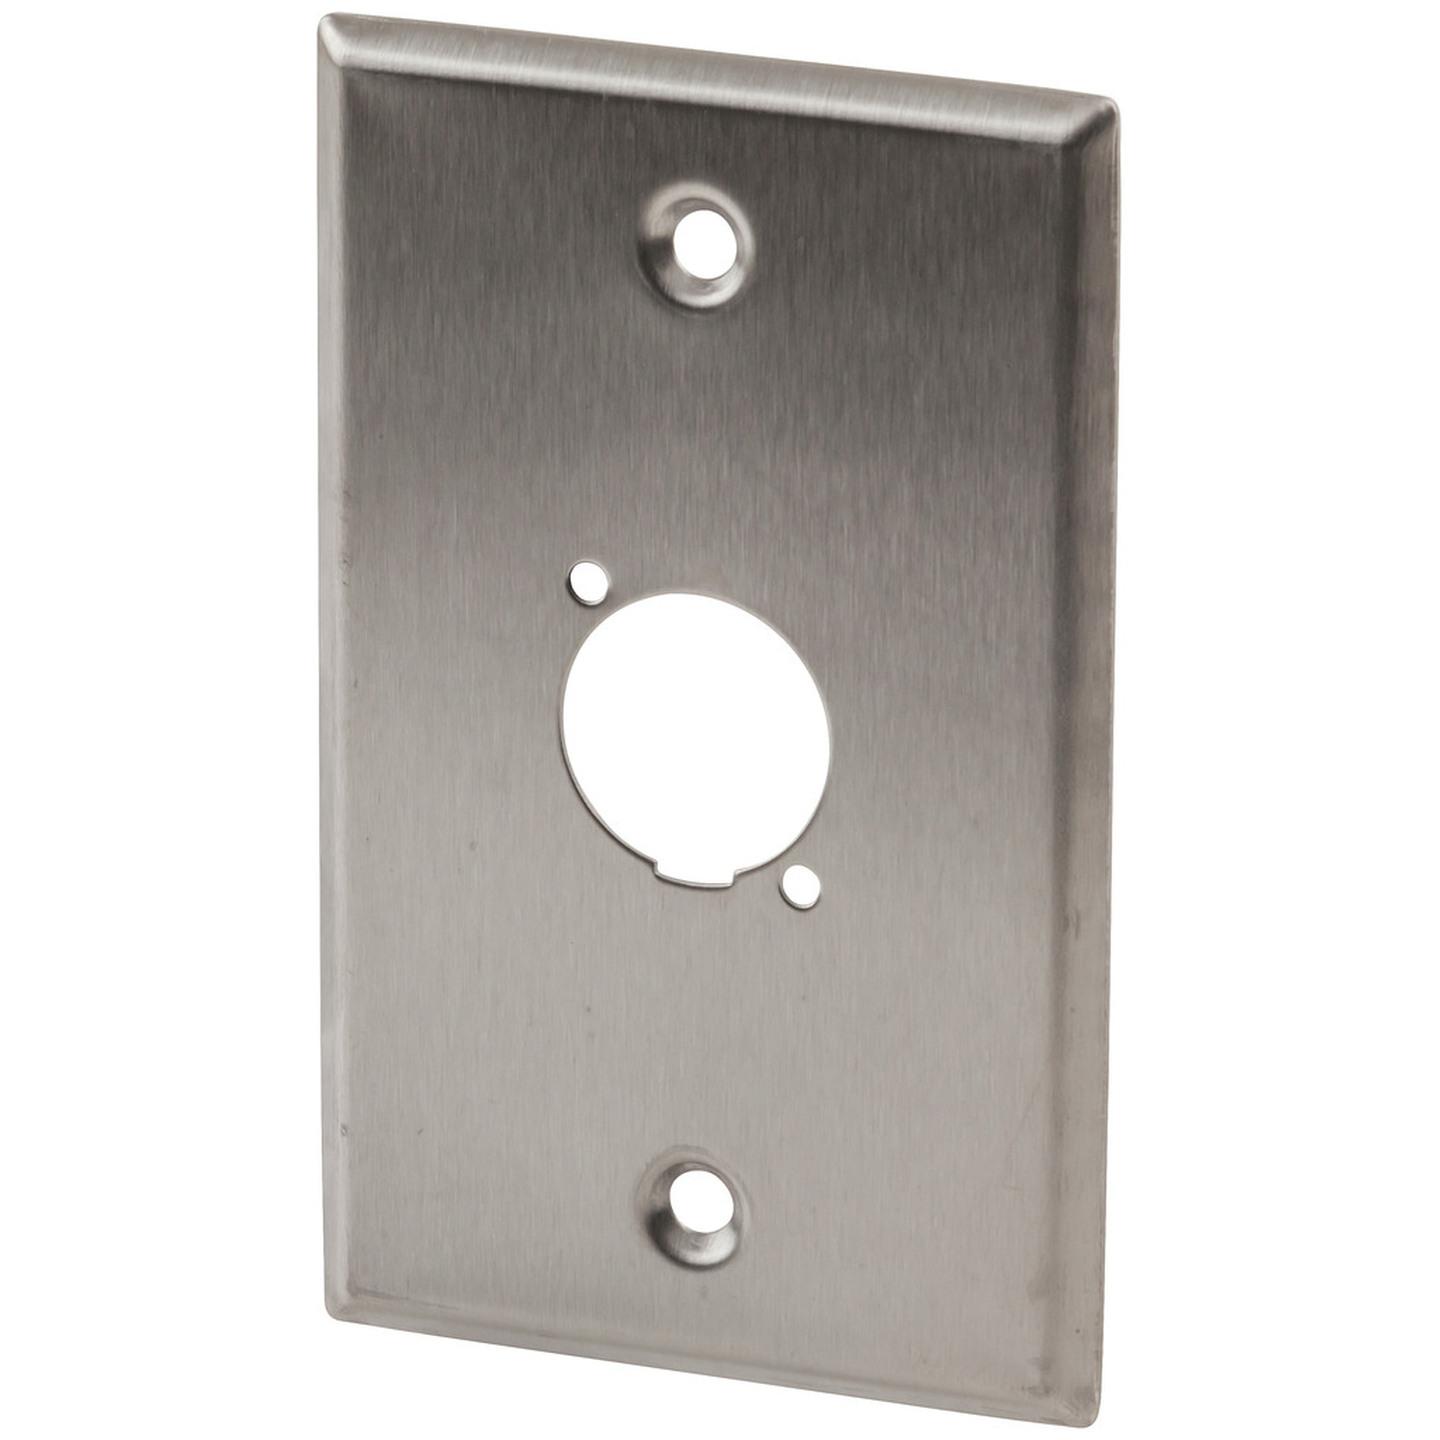 Stainless Steel Wall Plate XLR/Cannon